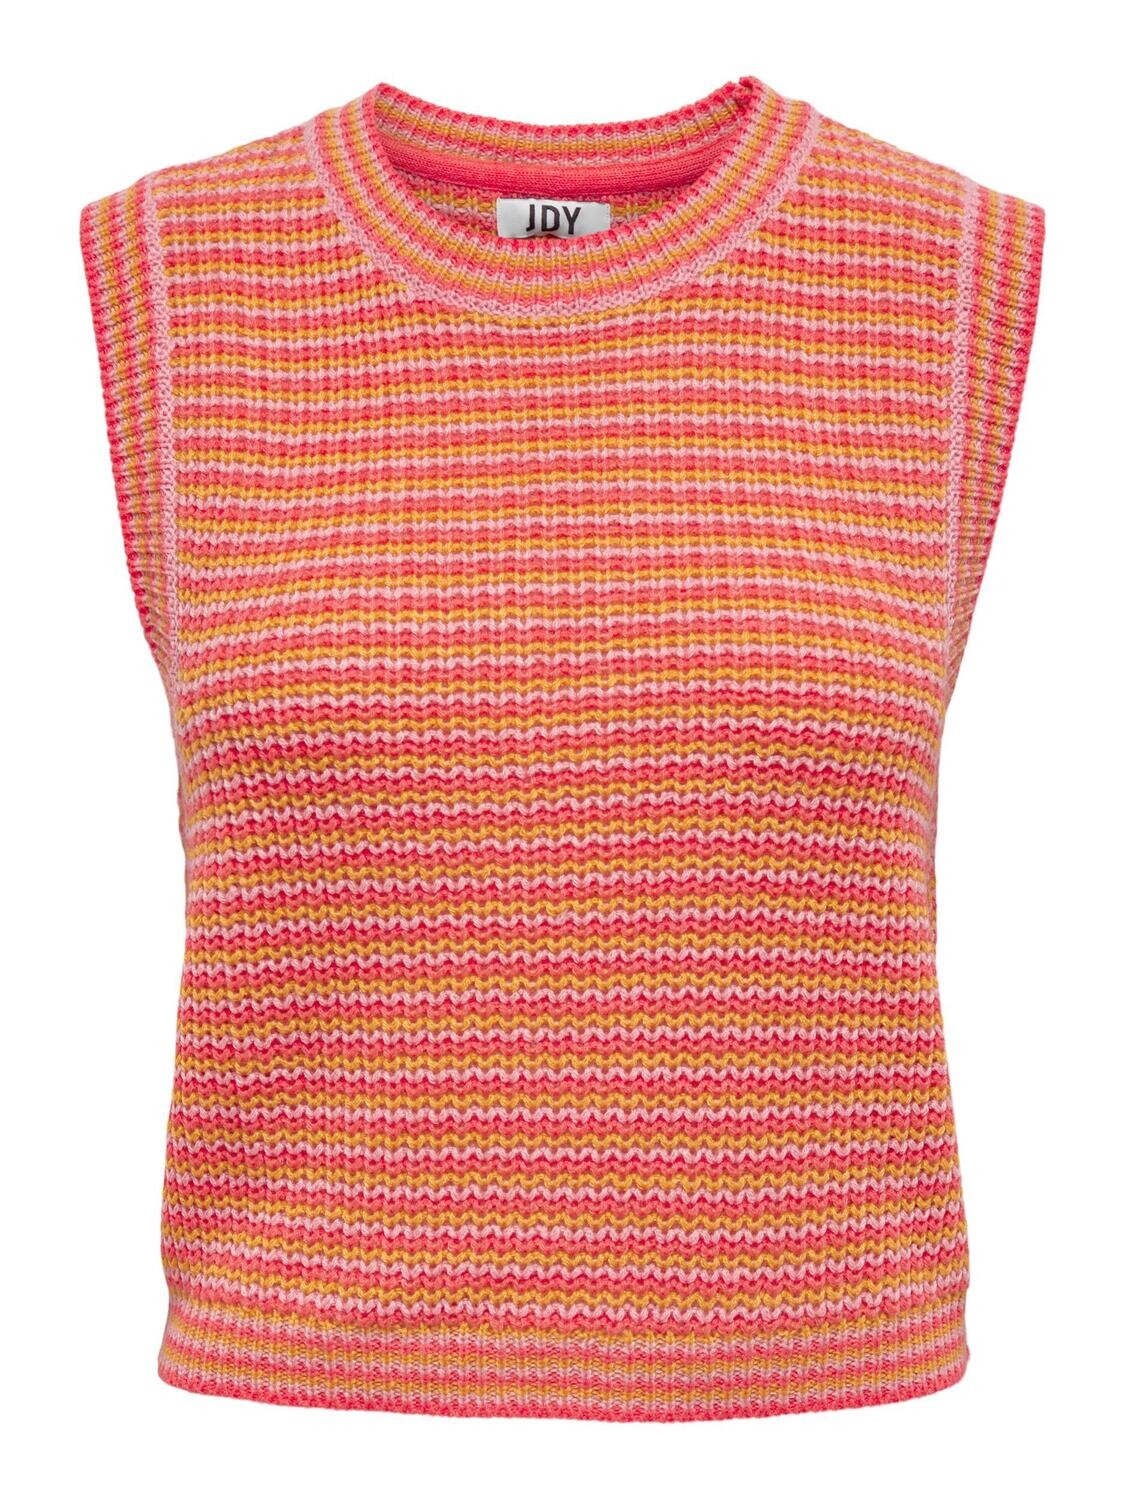 JDYVERA O-NECK VEST KNT Spiced Coral-W MIERAL YELLOW N